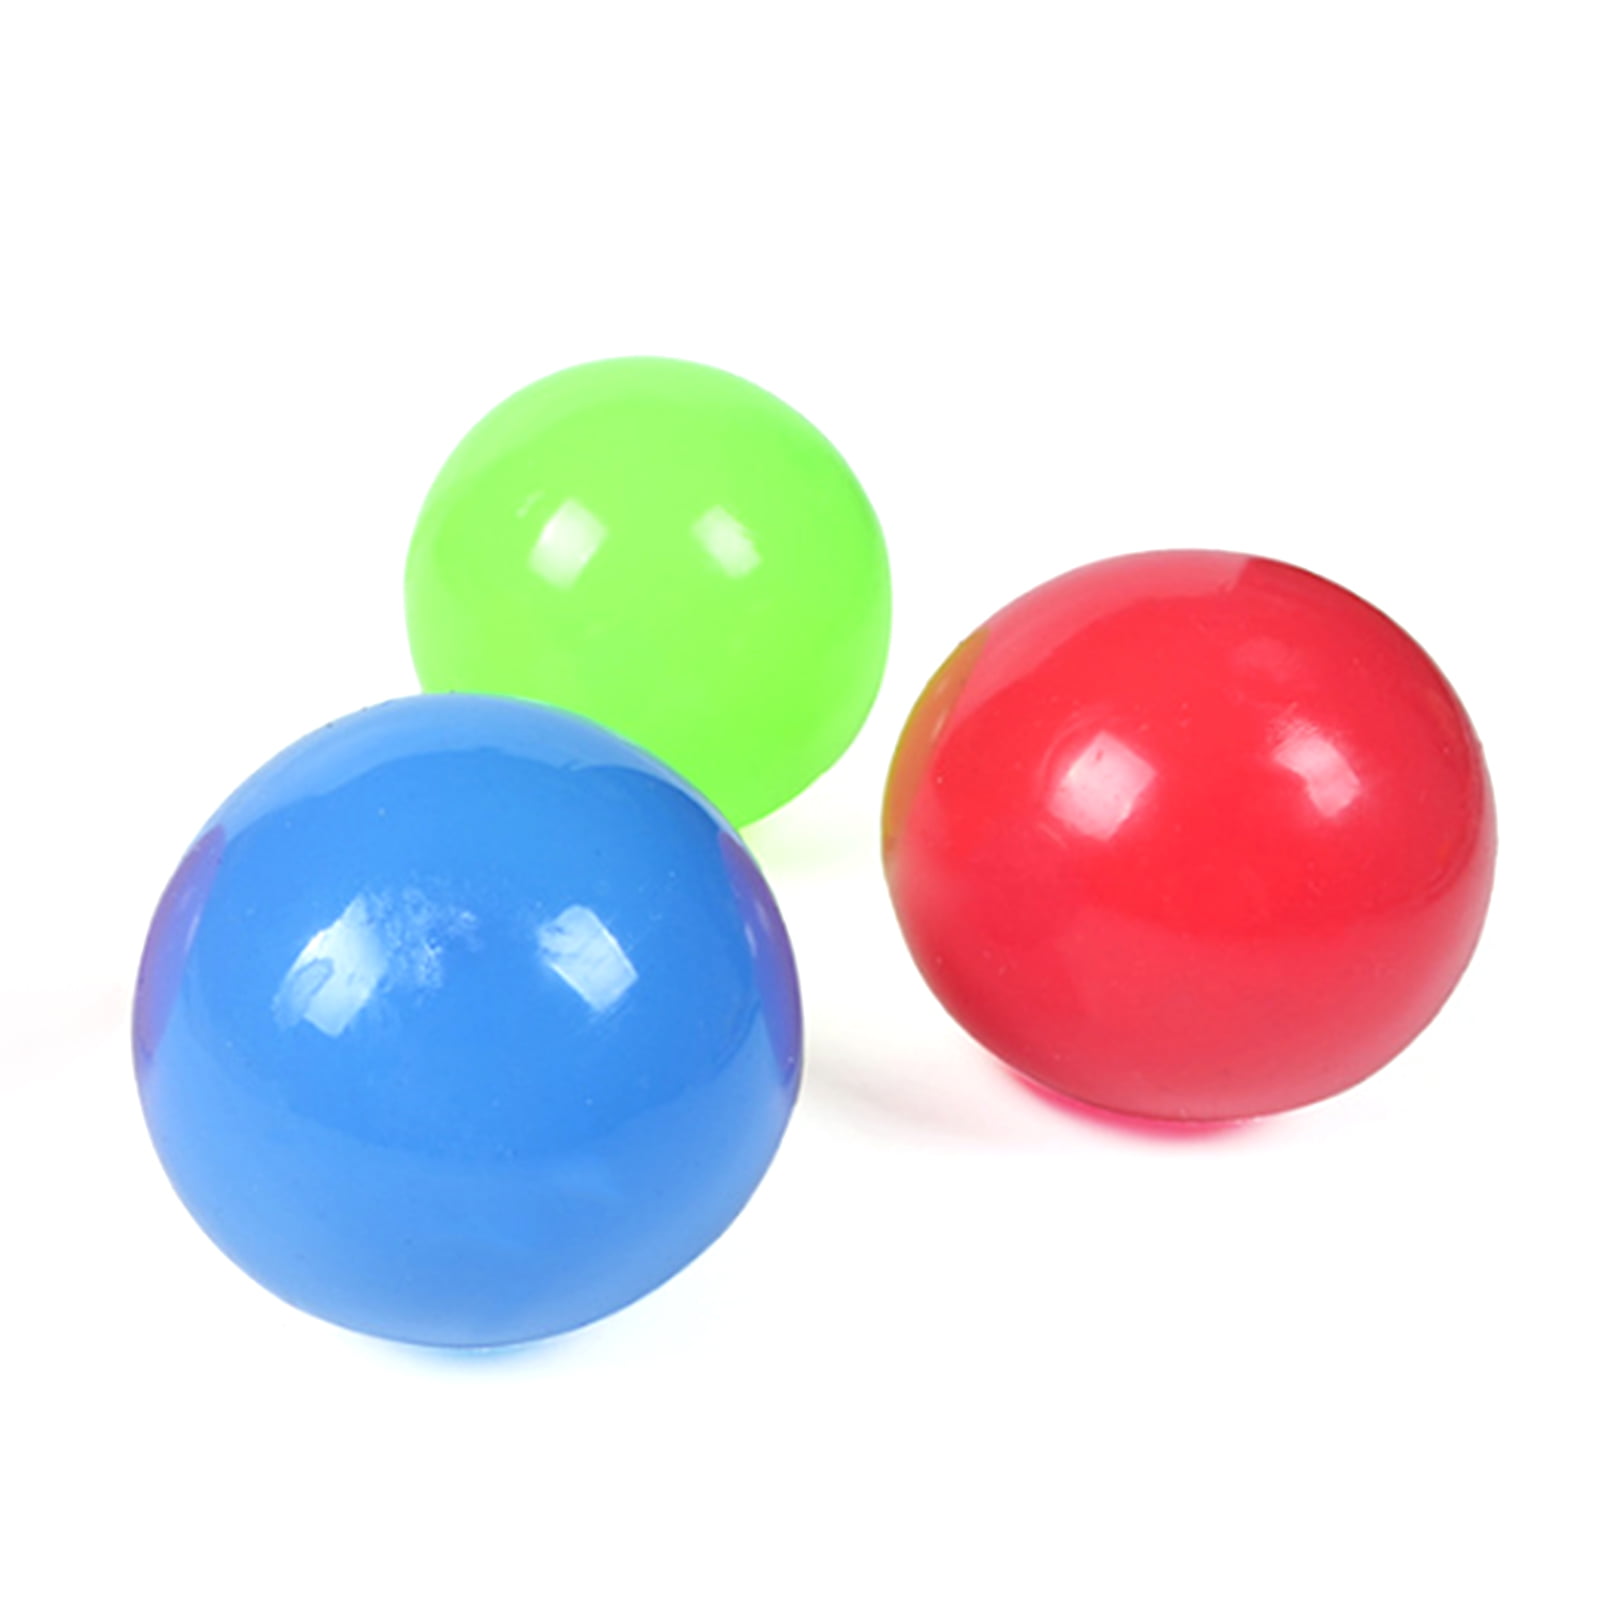 4X Fluorescent Sticky Wall Ball Sticky Target Ball Decompression Toy Kid Gift XL 